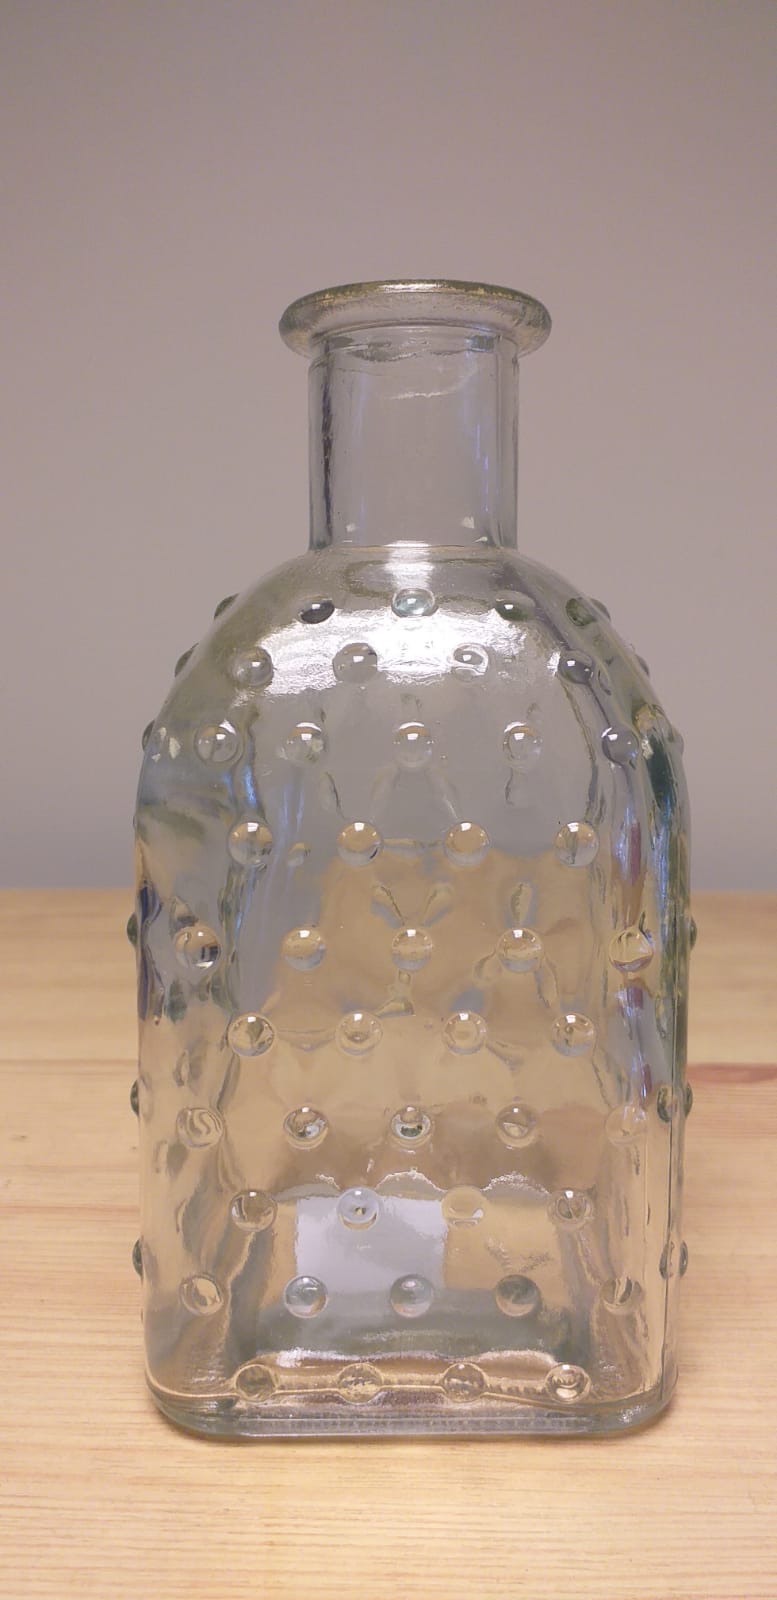 Decorative Glass Bottle With Spots 13 x 6.5cm Clear